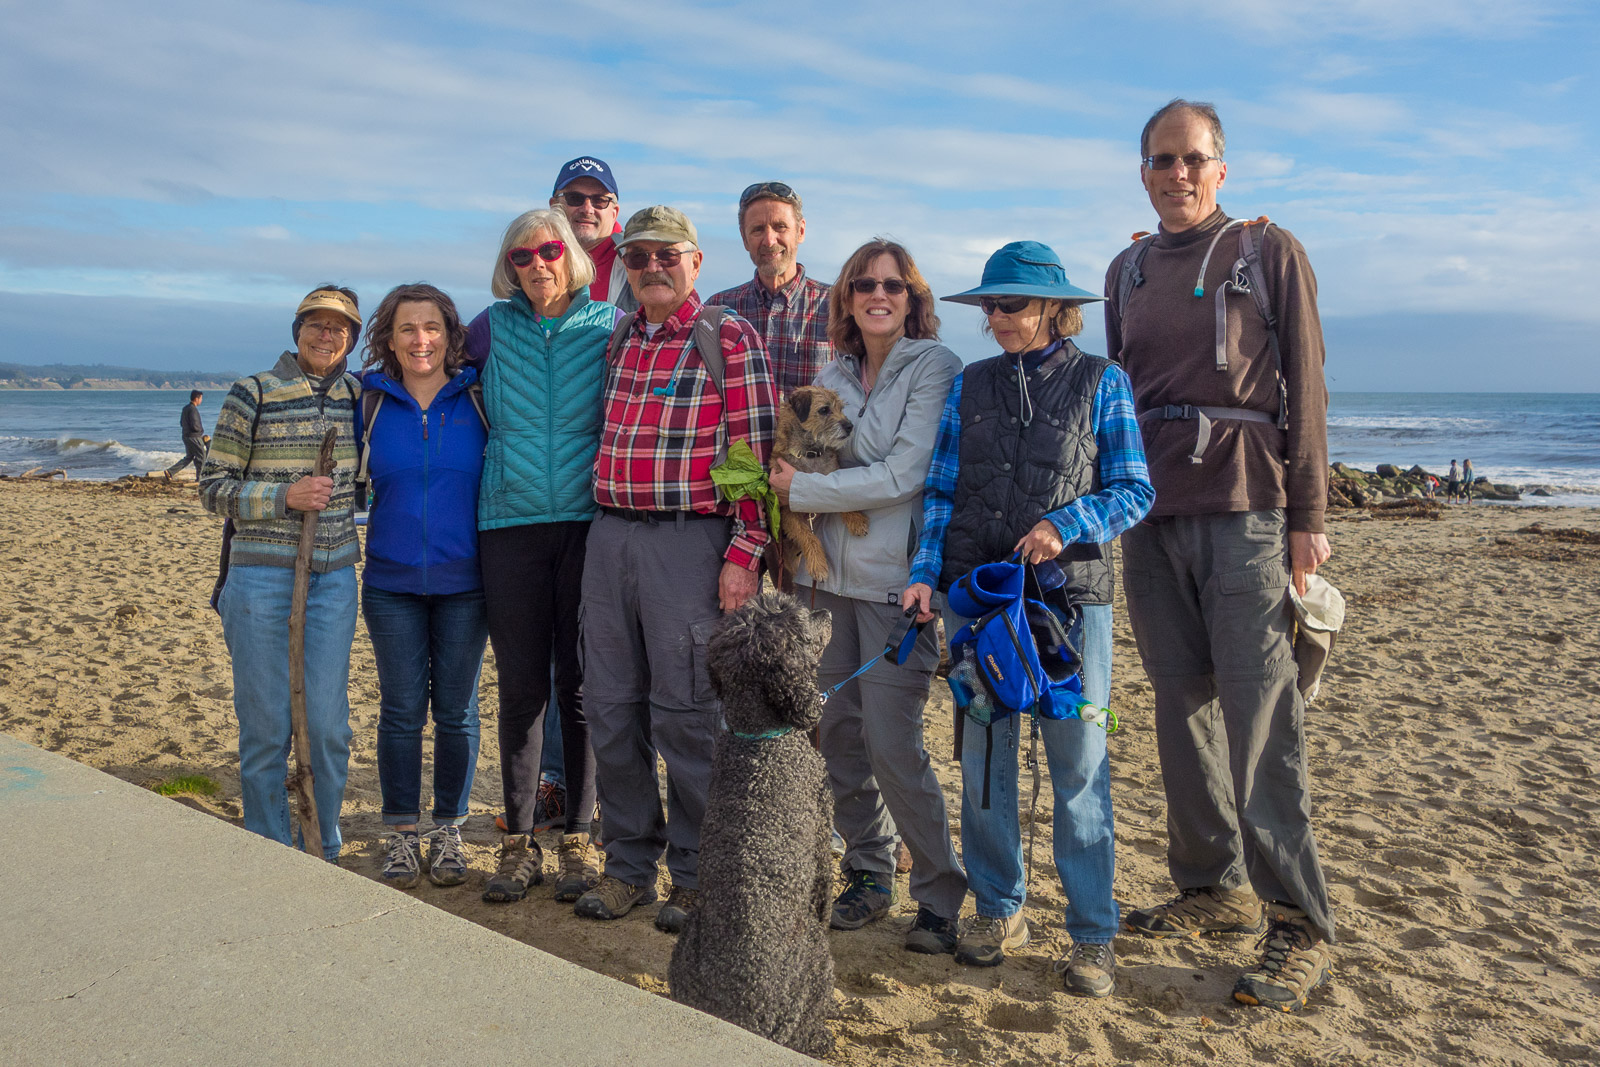 (l to r): Katie, Anna, Alice, John, Ron, Dave, Mac, Karen, Paula, and Bill.  Delton has his back to the camera.